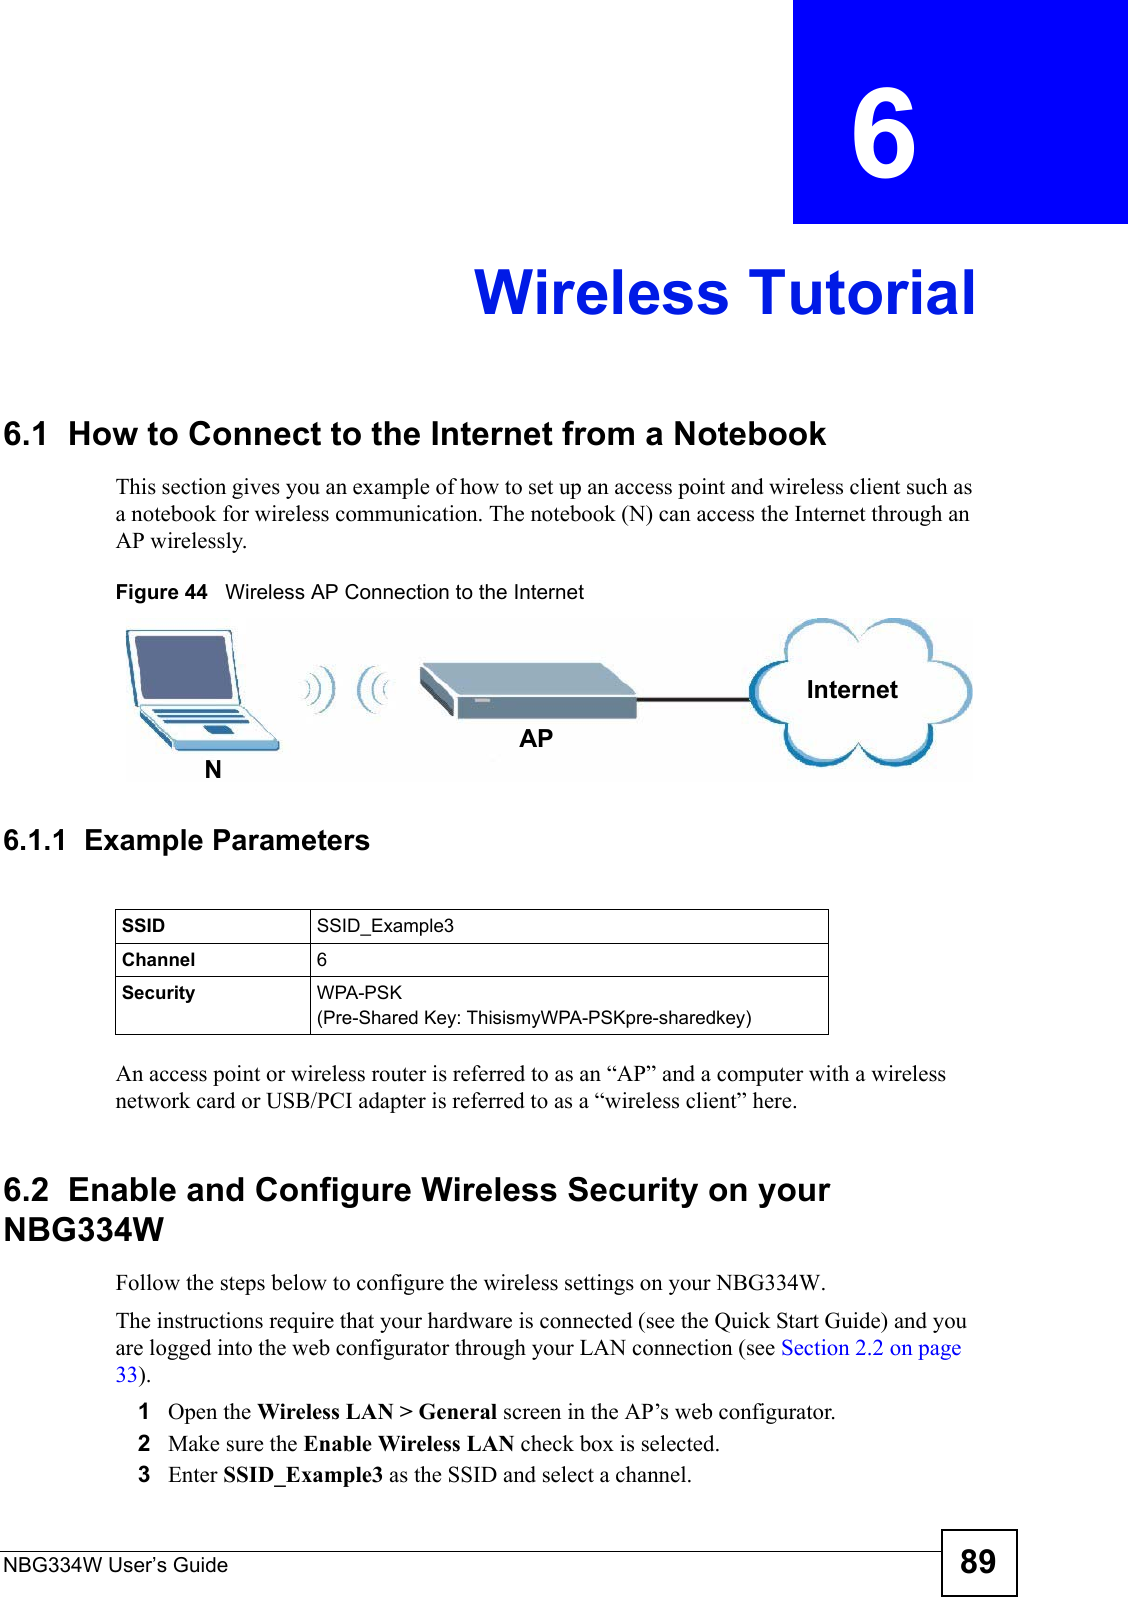 NBG334W User’s Guide 89CHAPTER  6 Wireless Tutorial6.1  How to Connect to the Internet from a NotebookThis section gives you an example of how to set up an access point and wireless client such as a notebook for wireless communication. The notebook (N) can access the Internet through an AP wirelessly.Figure 44   Wireless AP Connection to the Internet6.1.1  Example ParametersAn access point or wireless router is referred to as an “AP” and a computer with a wireless network card or USB/PCI adapter is referred to as a “wireless client” here.6.2  Enable and Configure Wireless Security on your NBG334WFollow the steps below to configure the wireless settings on your NBG334W. The instructions require that your hardware is connected (see the Quick Start Guide) and you are logged into the web configurator through your LAN connection (see Section 2.2 on page 33).1Open the Wireless LAN &gt; General screen in the AP’s web configurator.2Make sure the Enable Wireless LAN check box is selected.3Enter SSID_Example3 as the SSID and select a channel.NAPInternetSSID SSID_Example3Channel 6Security  WPA-PSK(Pre-Shared Key: ThisismyWPA-PSKpre-sharedkey)